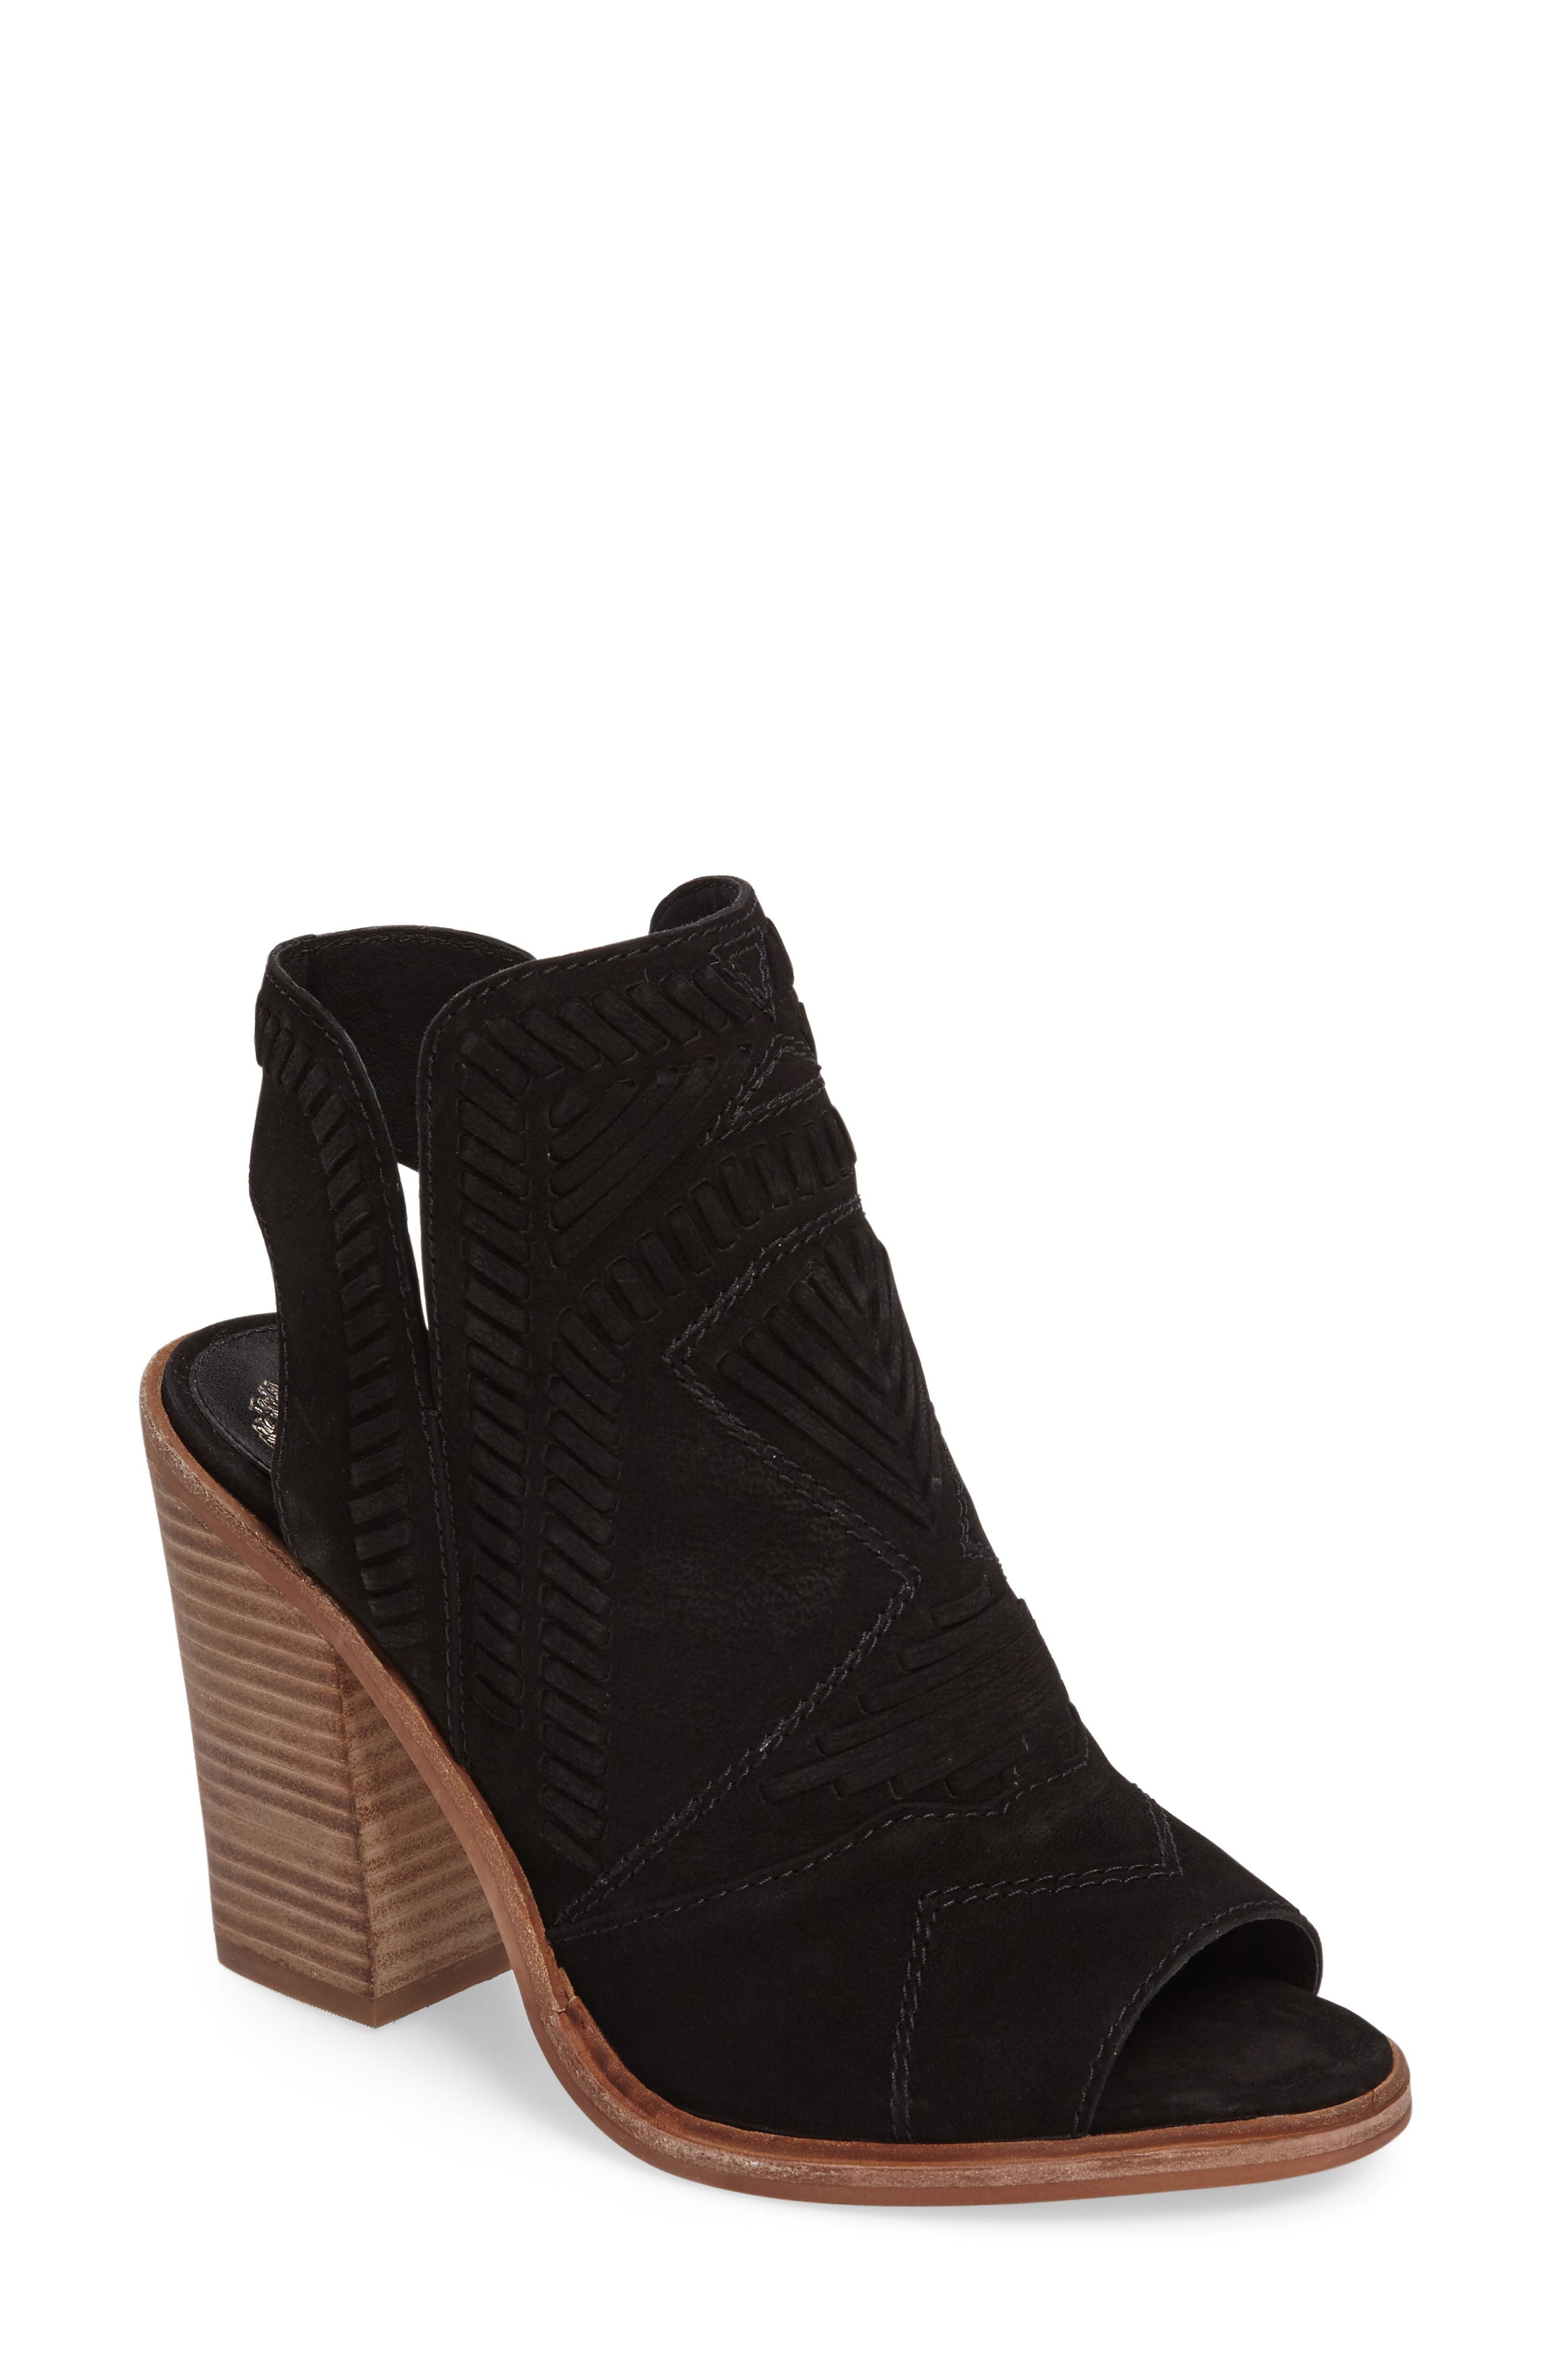 vince camuto cholia bootie